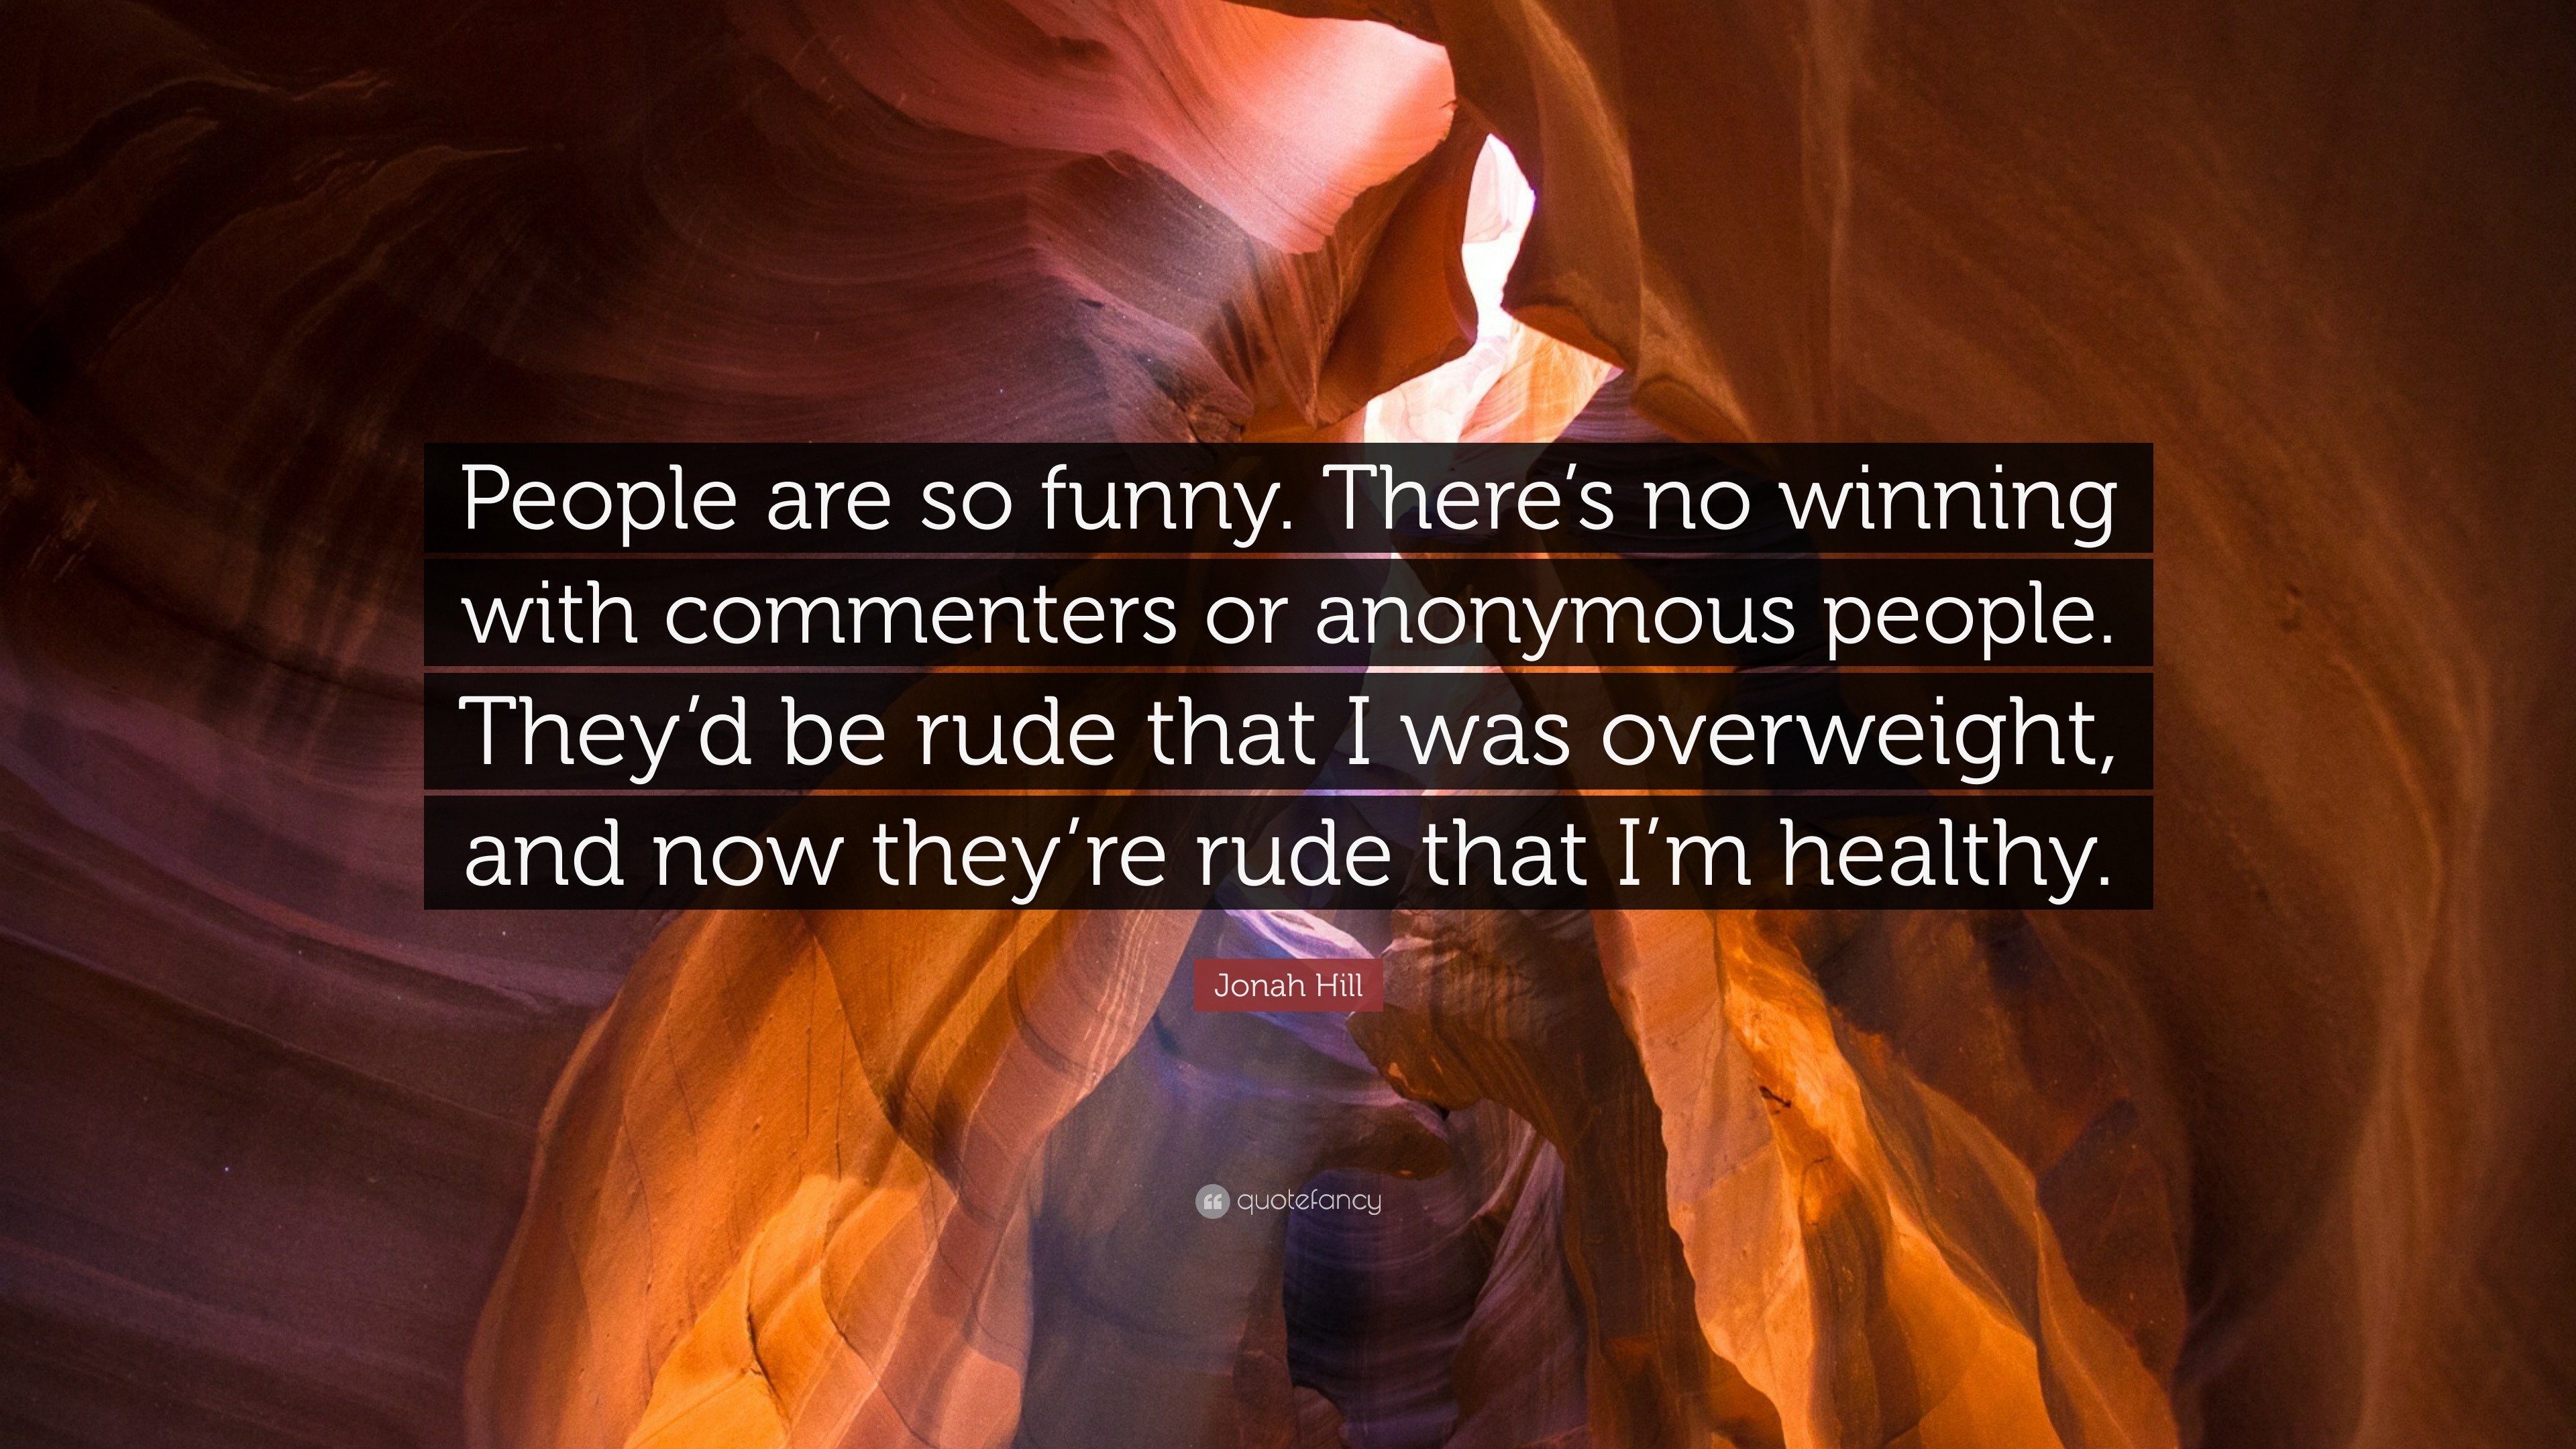 Jonah Hill Quote: “People are so funny. There's no winning with commenters  or anonymous people. They'd be rude that I was overweight, and n...”